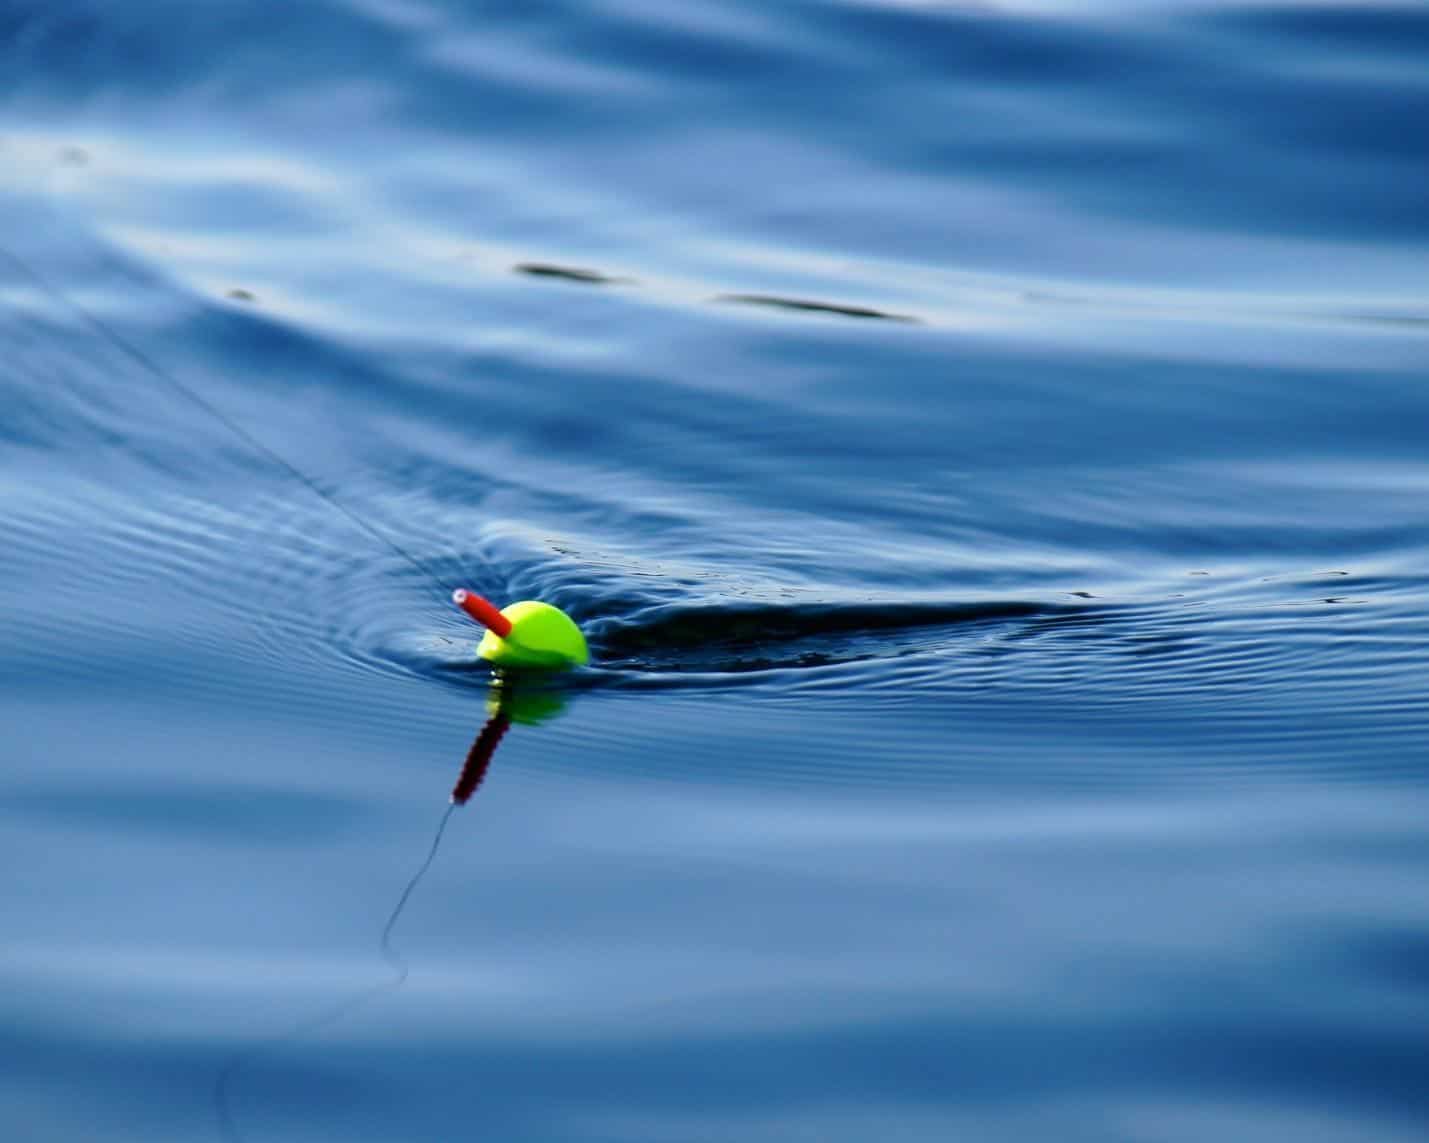 A green bobber in clearwater